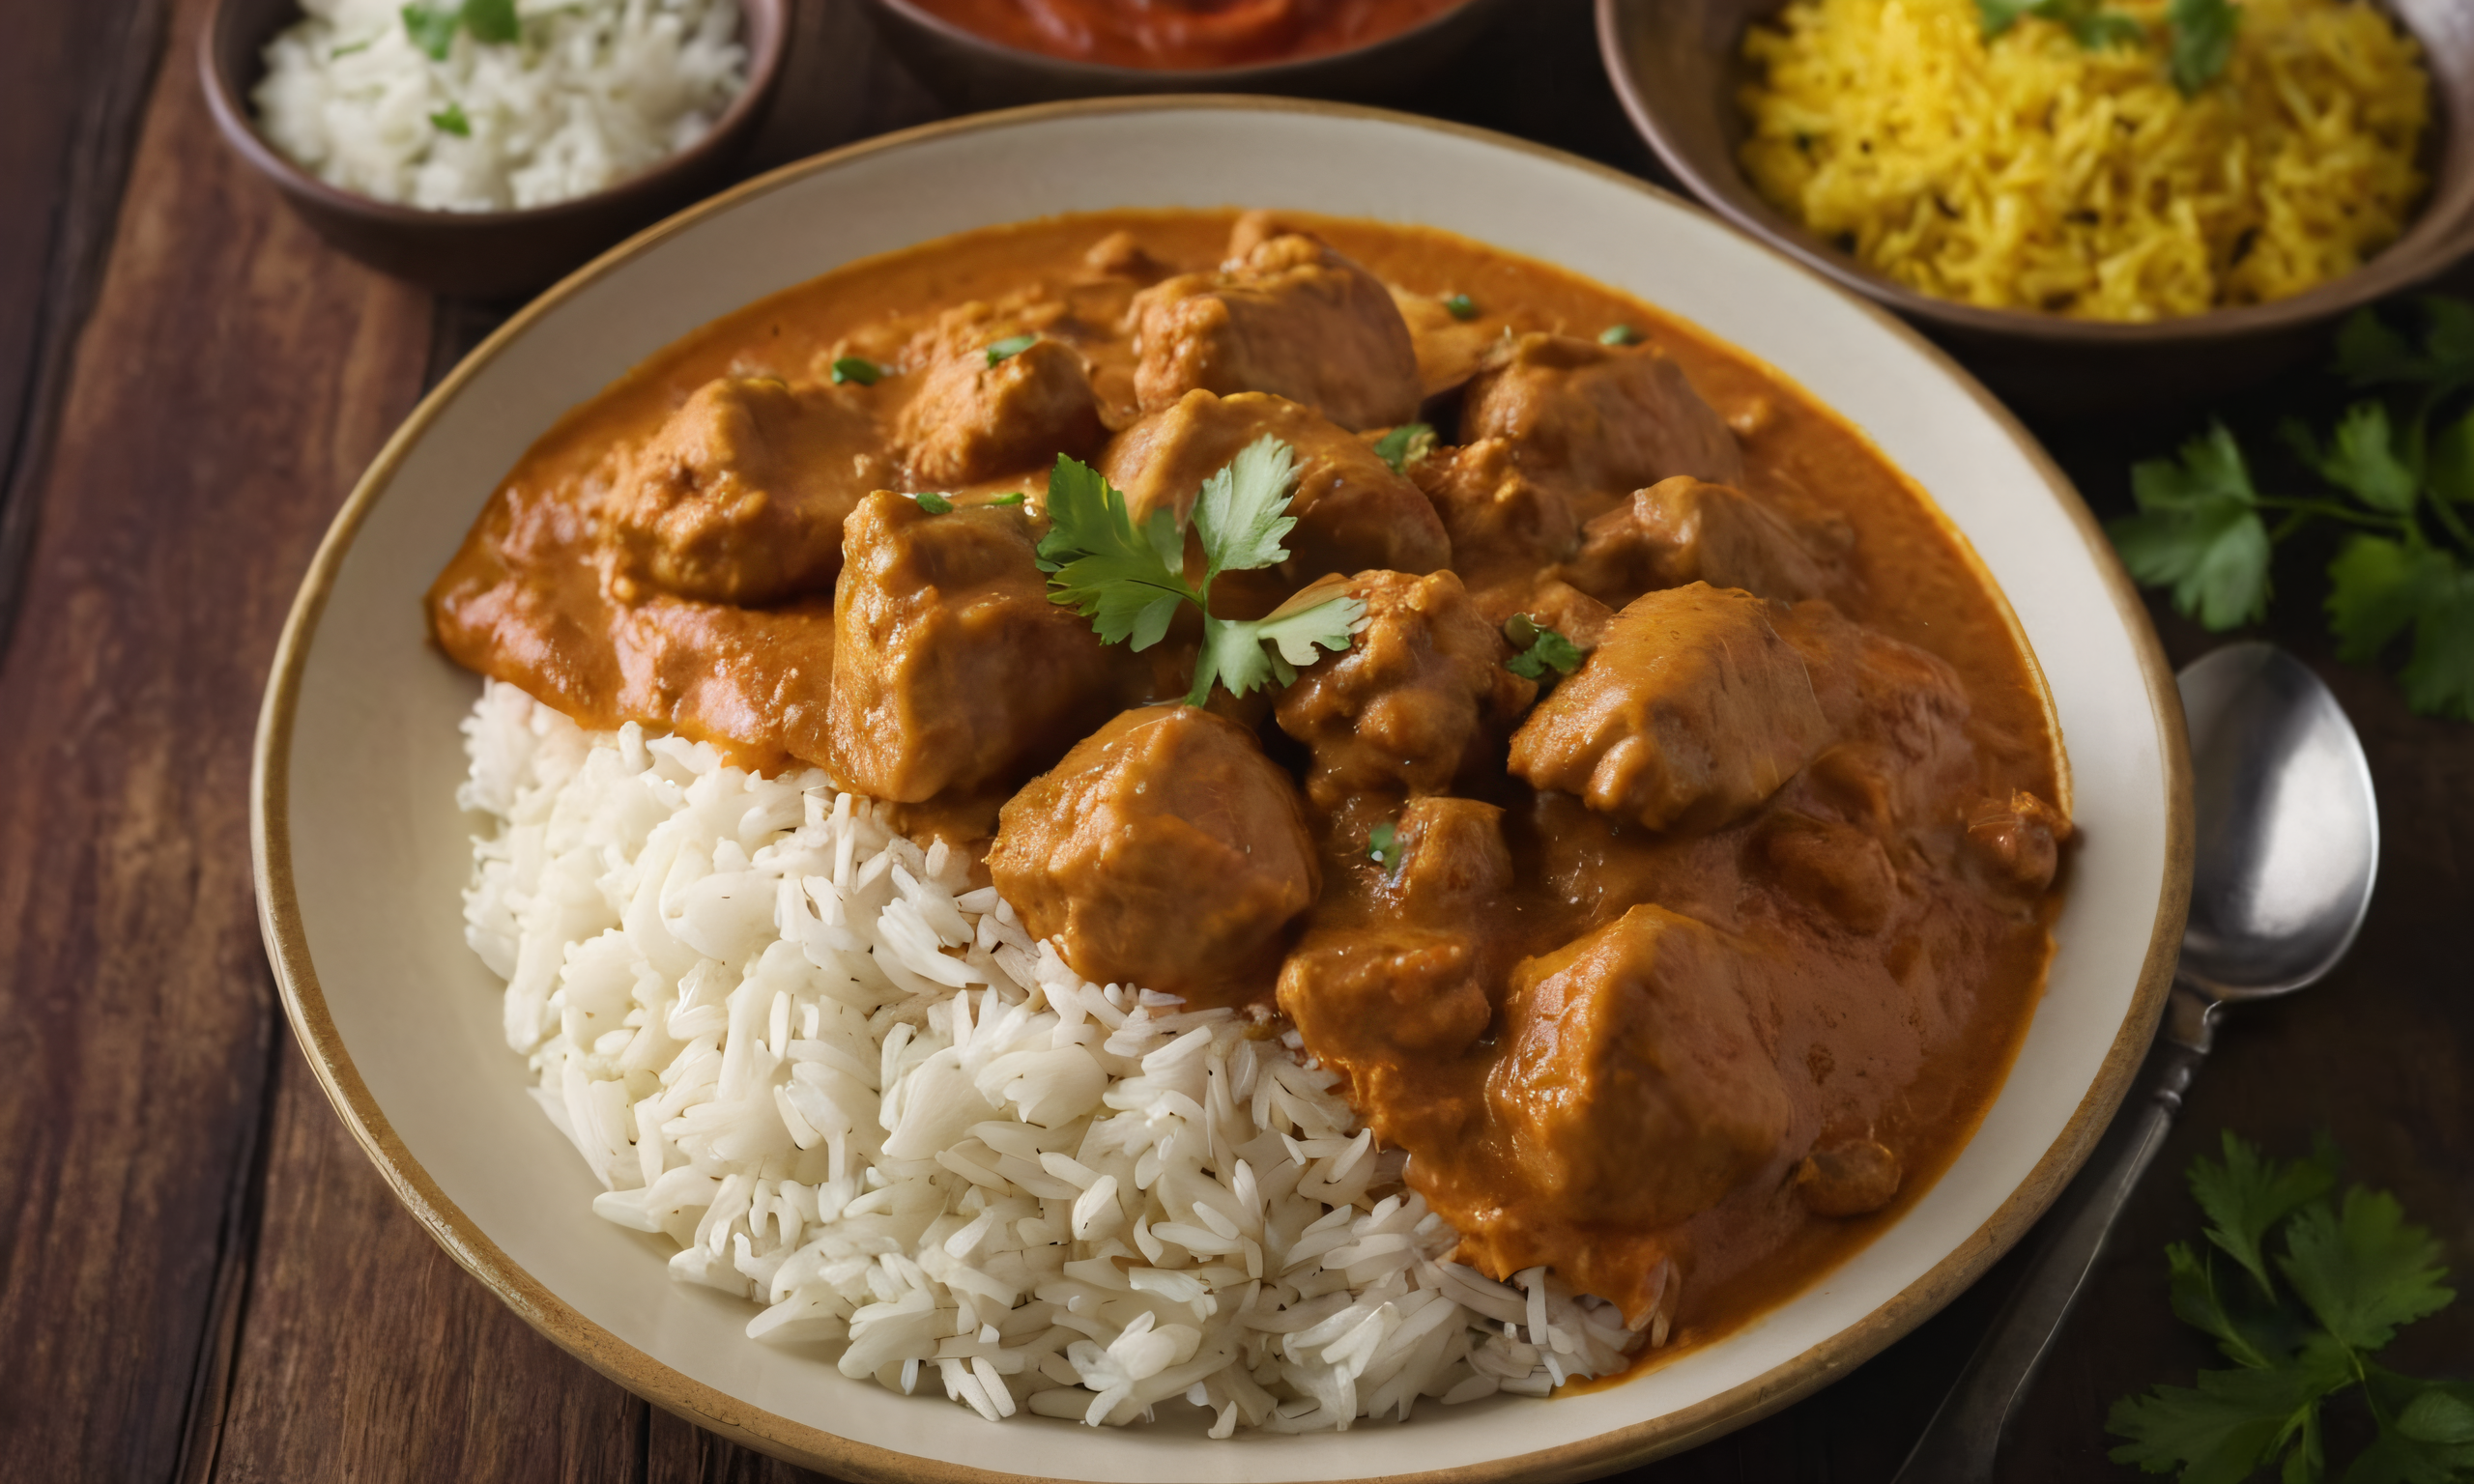 Delicious butter chicken dish accompanied by fragrant rice